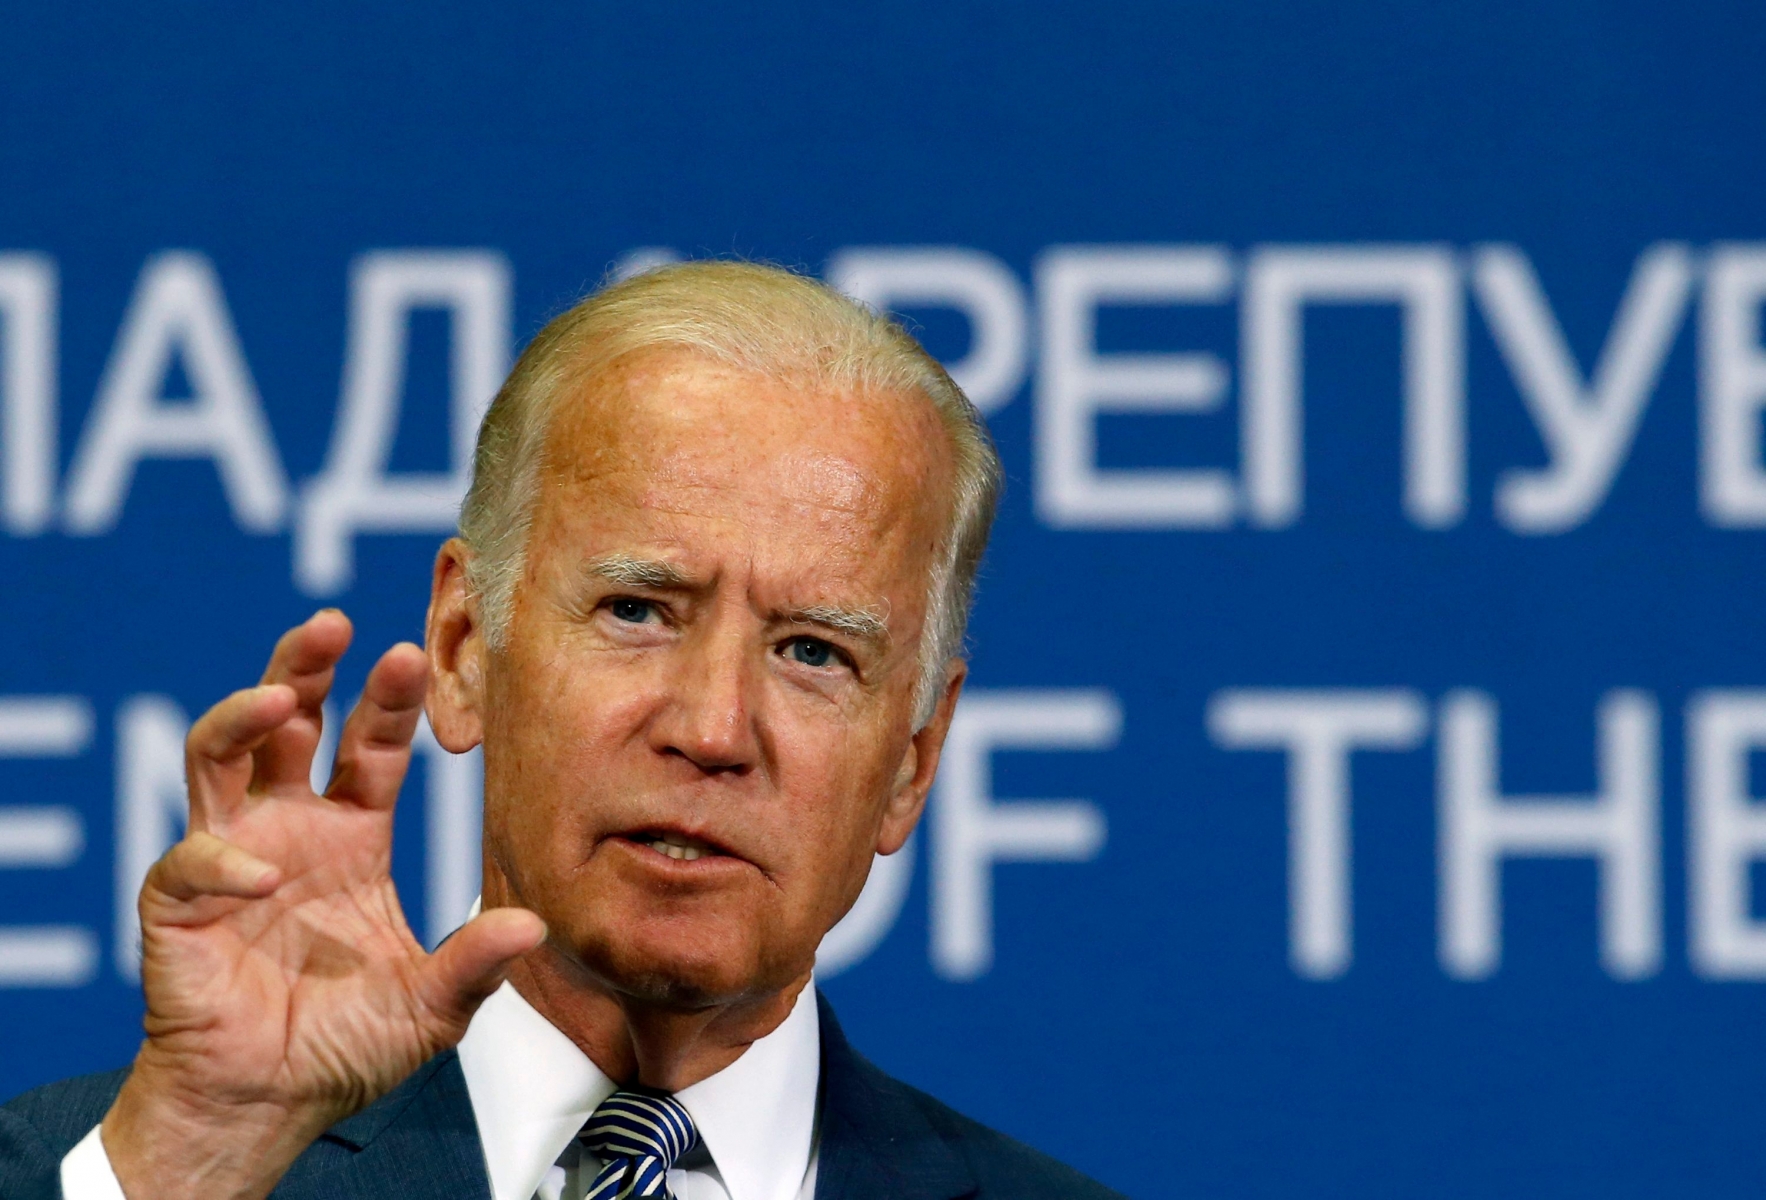 FILE - In this Aug. 16, 2016 file photo, Vice President Joe Biden gestures during a news conference in Belgrade, Serbia. Biden faces a difficult mission when he travels to Ankara on Wednesday, Aug. 24, 2016, to try to smooth over recent strains: He comes bearing no assurances that the U.S. will agree to TurkeyÄôs demand that it extradite Fethullah Gulen, who lives in Pennsylvania. (AP Photo/Darko Vojinovic, File) US Turkey